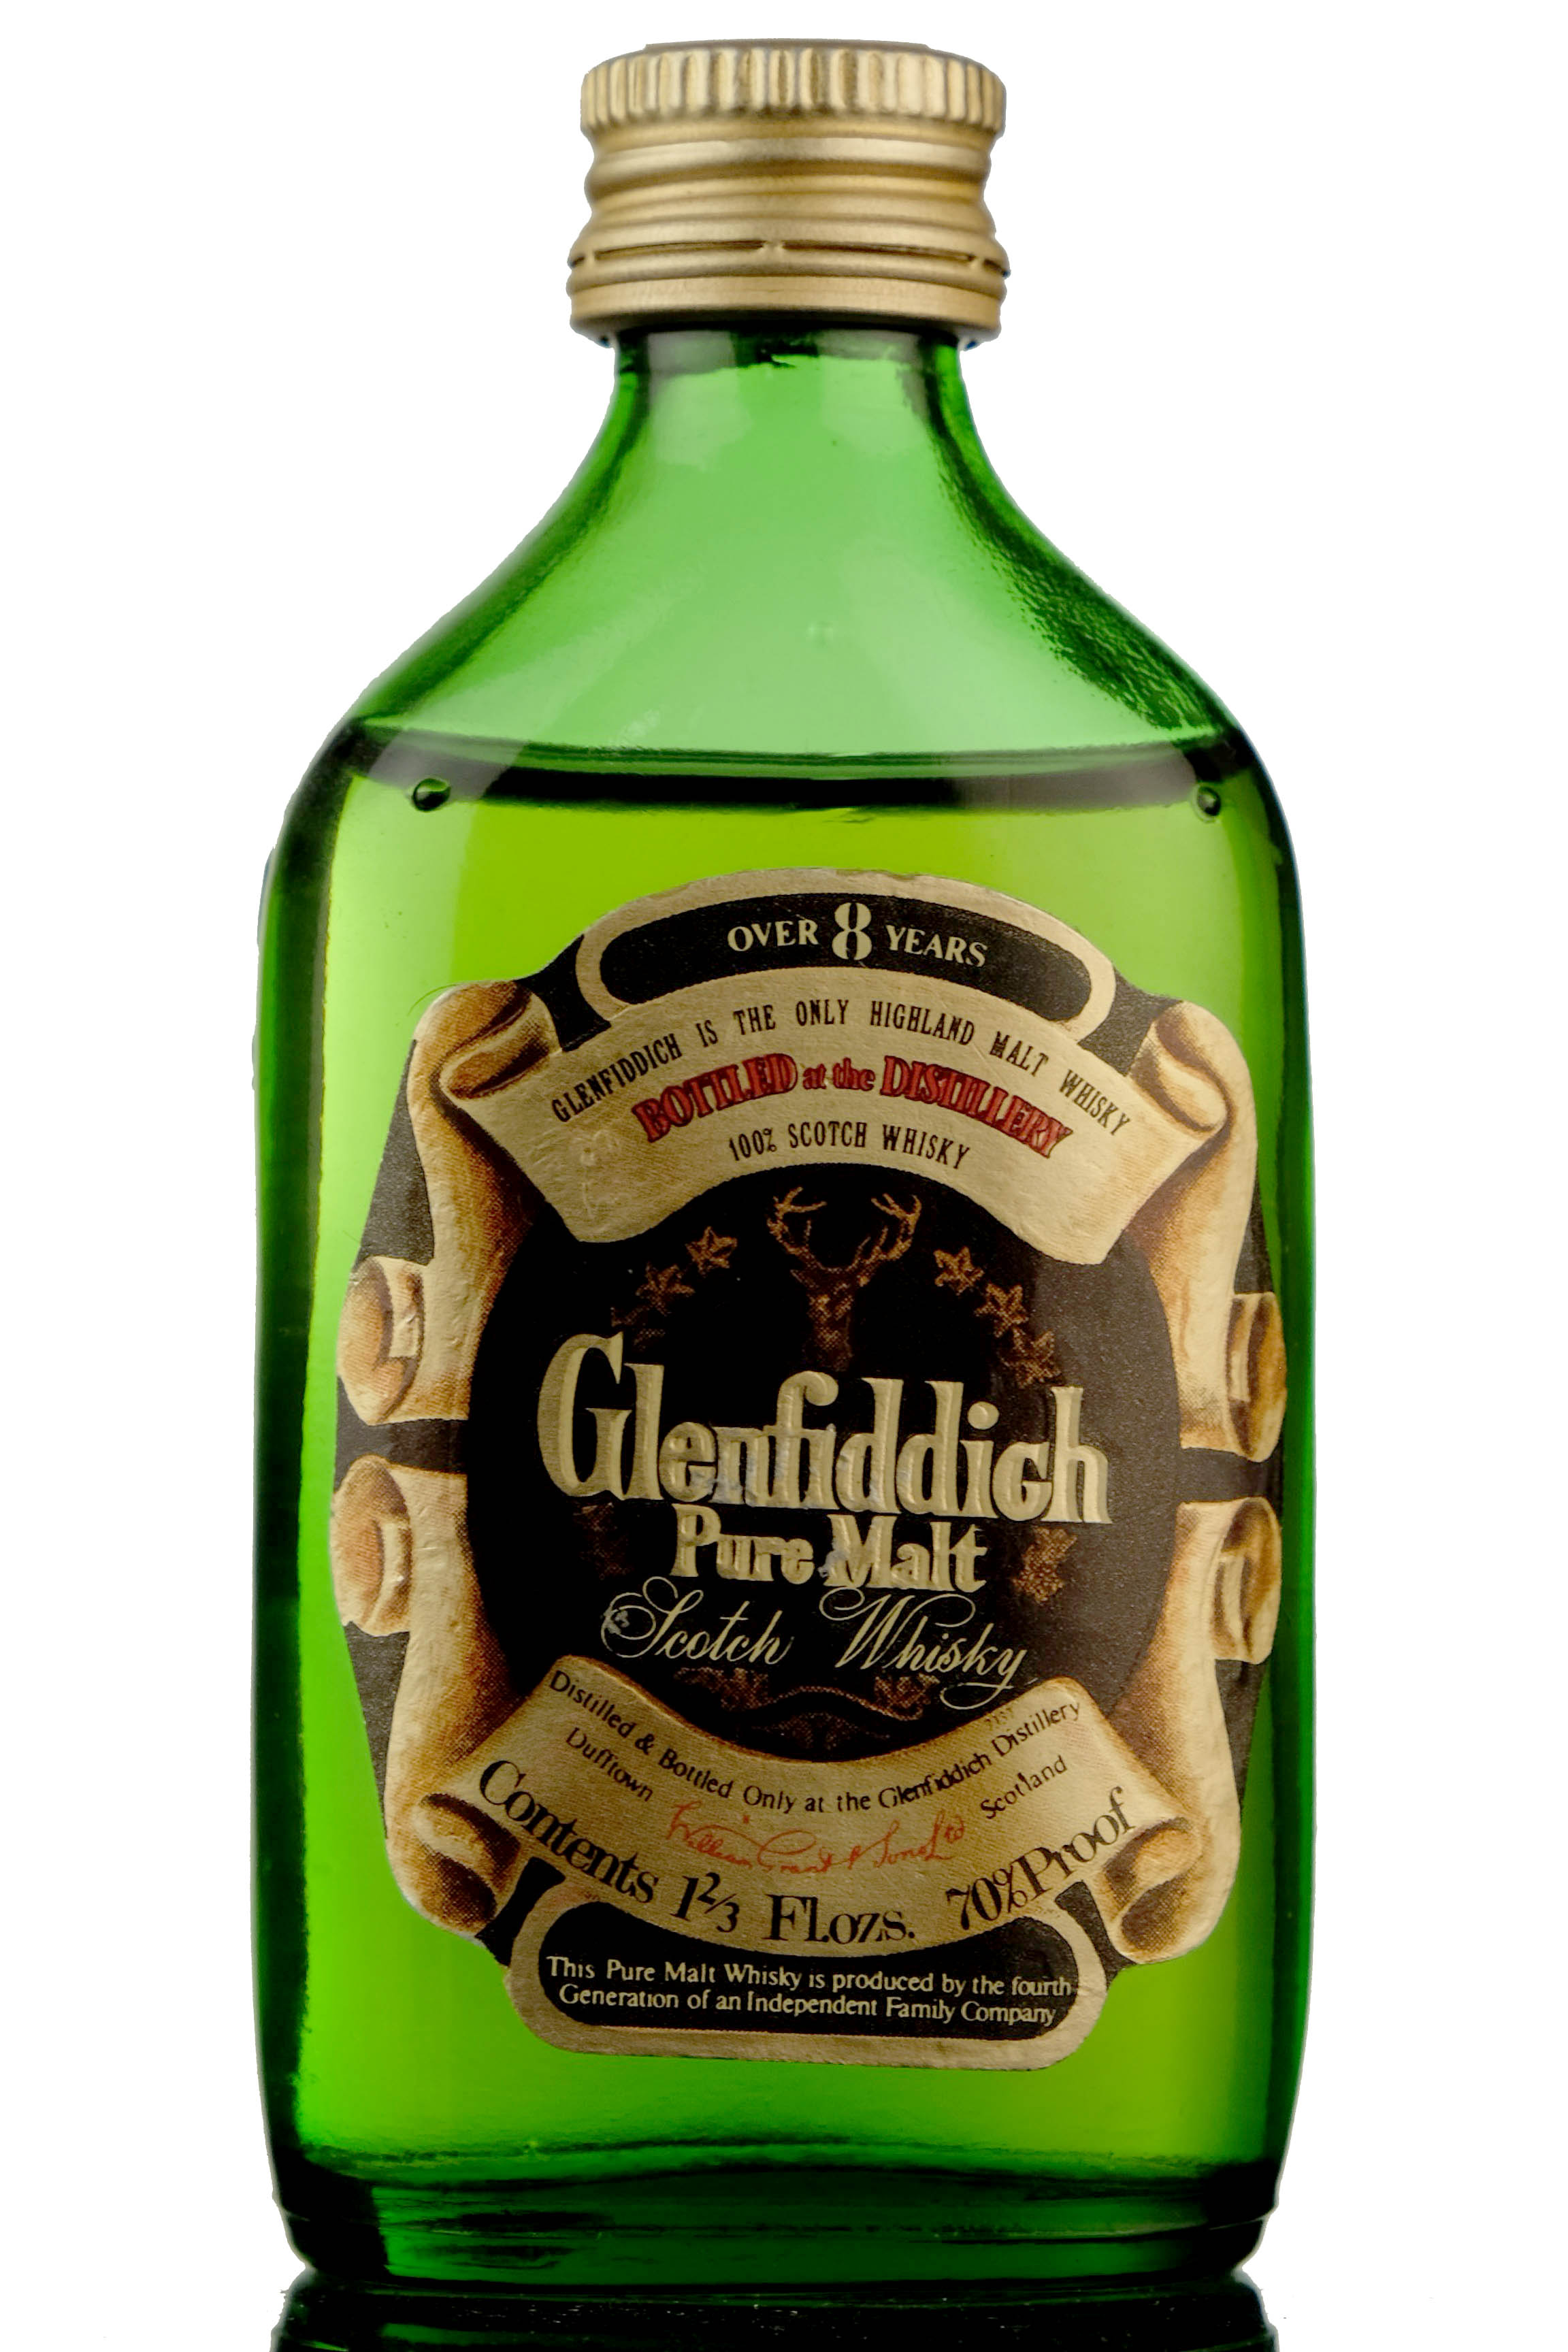 Glenfiddich 8 Year Old - 70 Proof Miniature